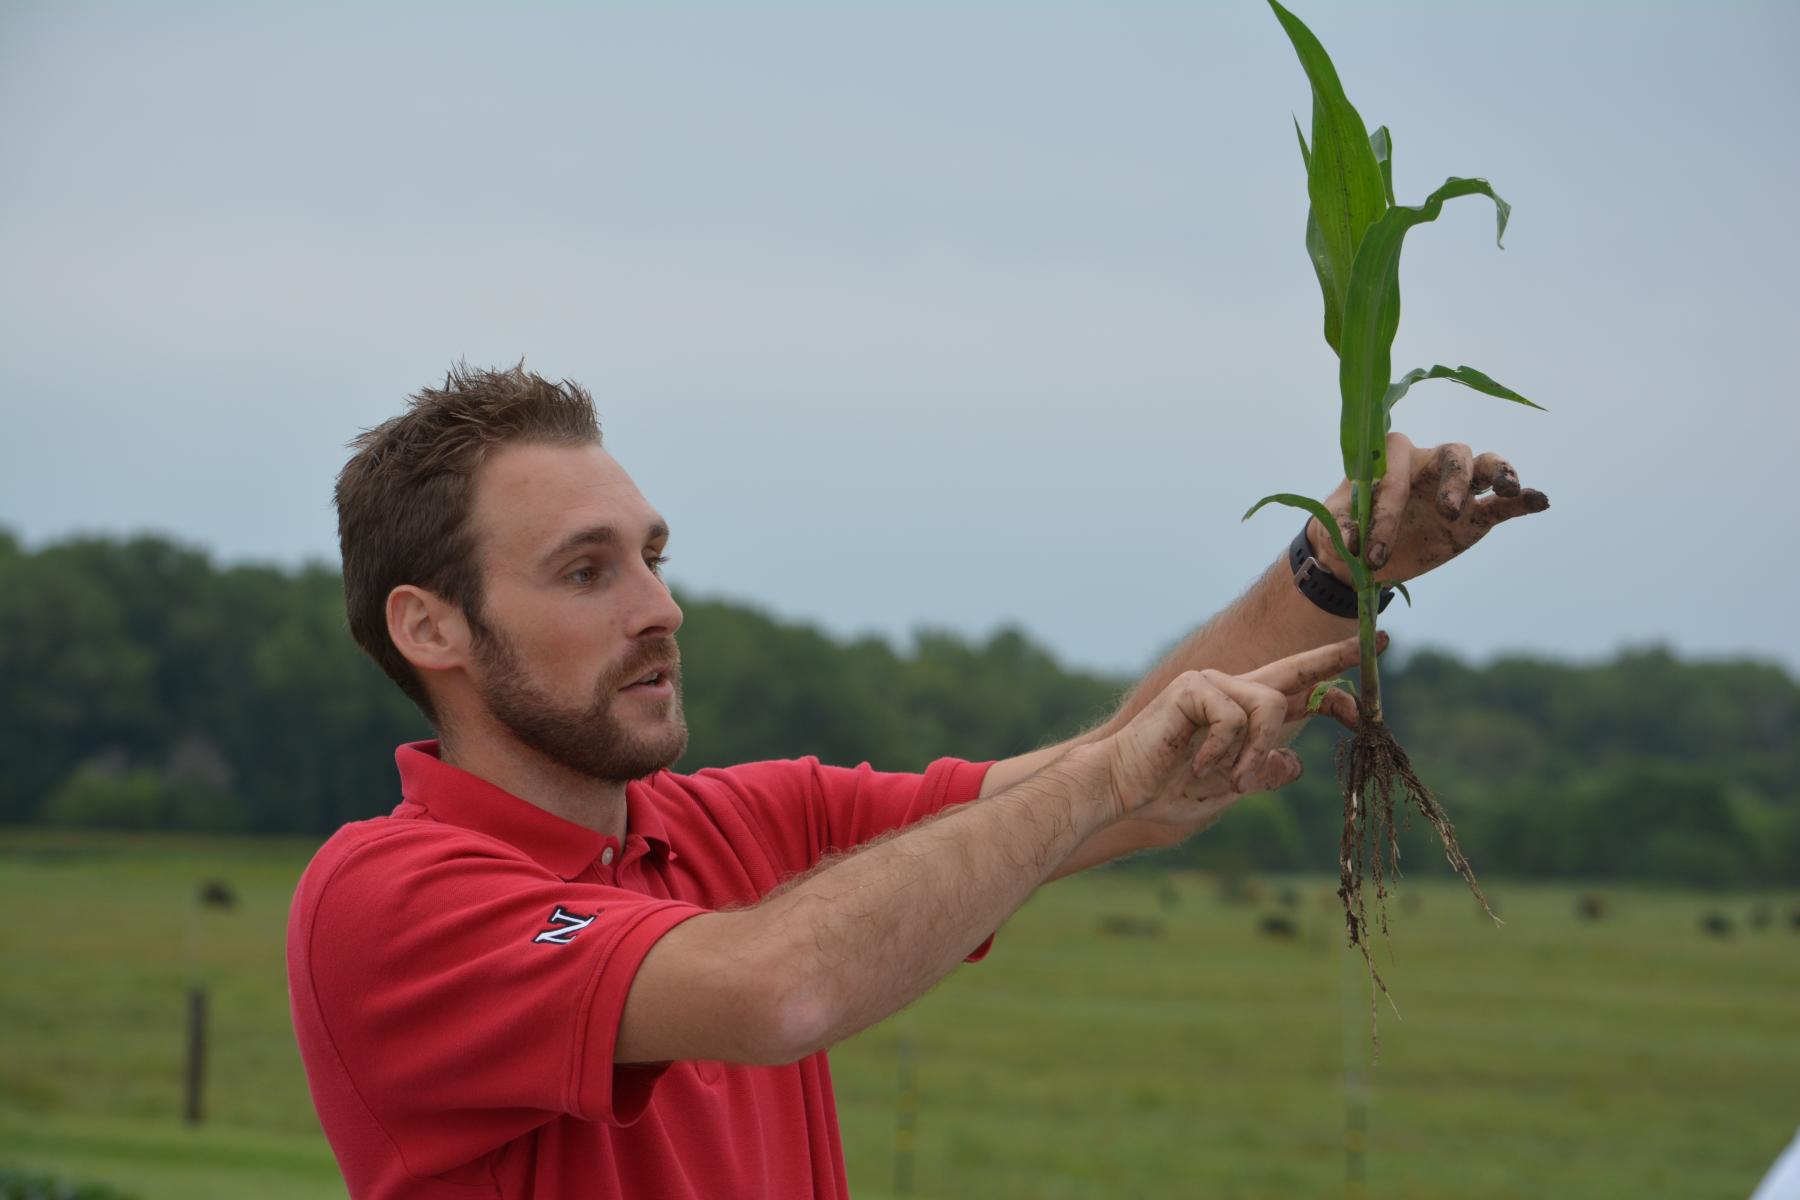 Researcher inspecting roots of a plant